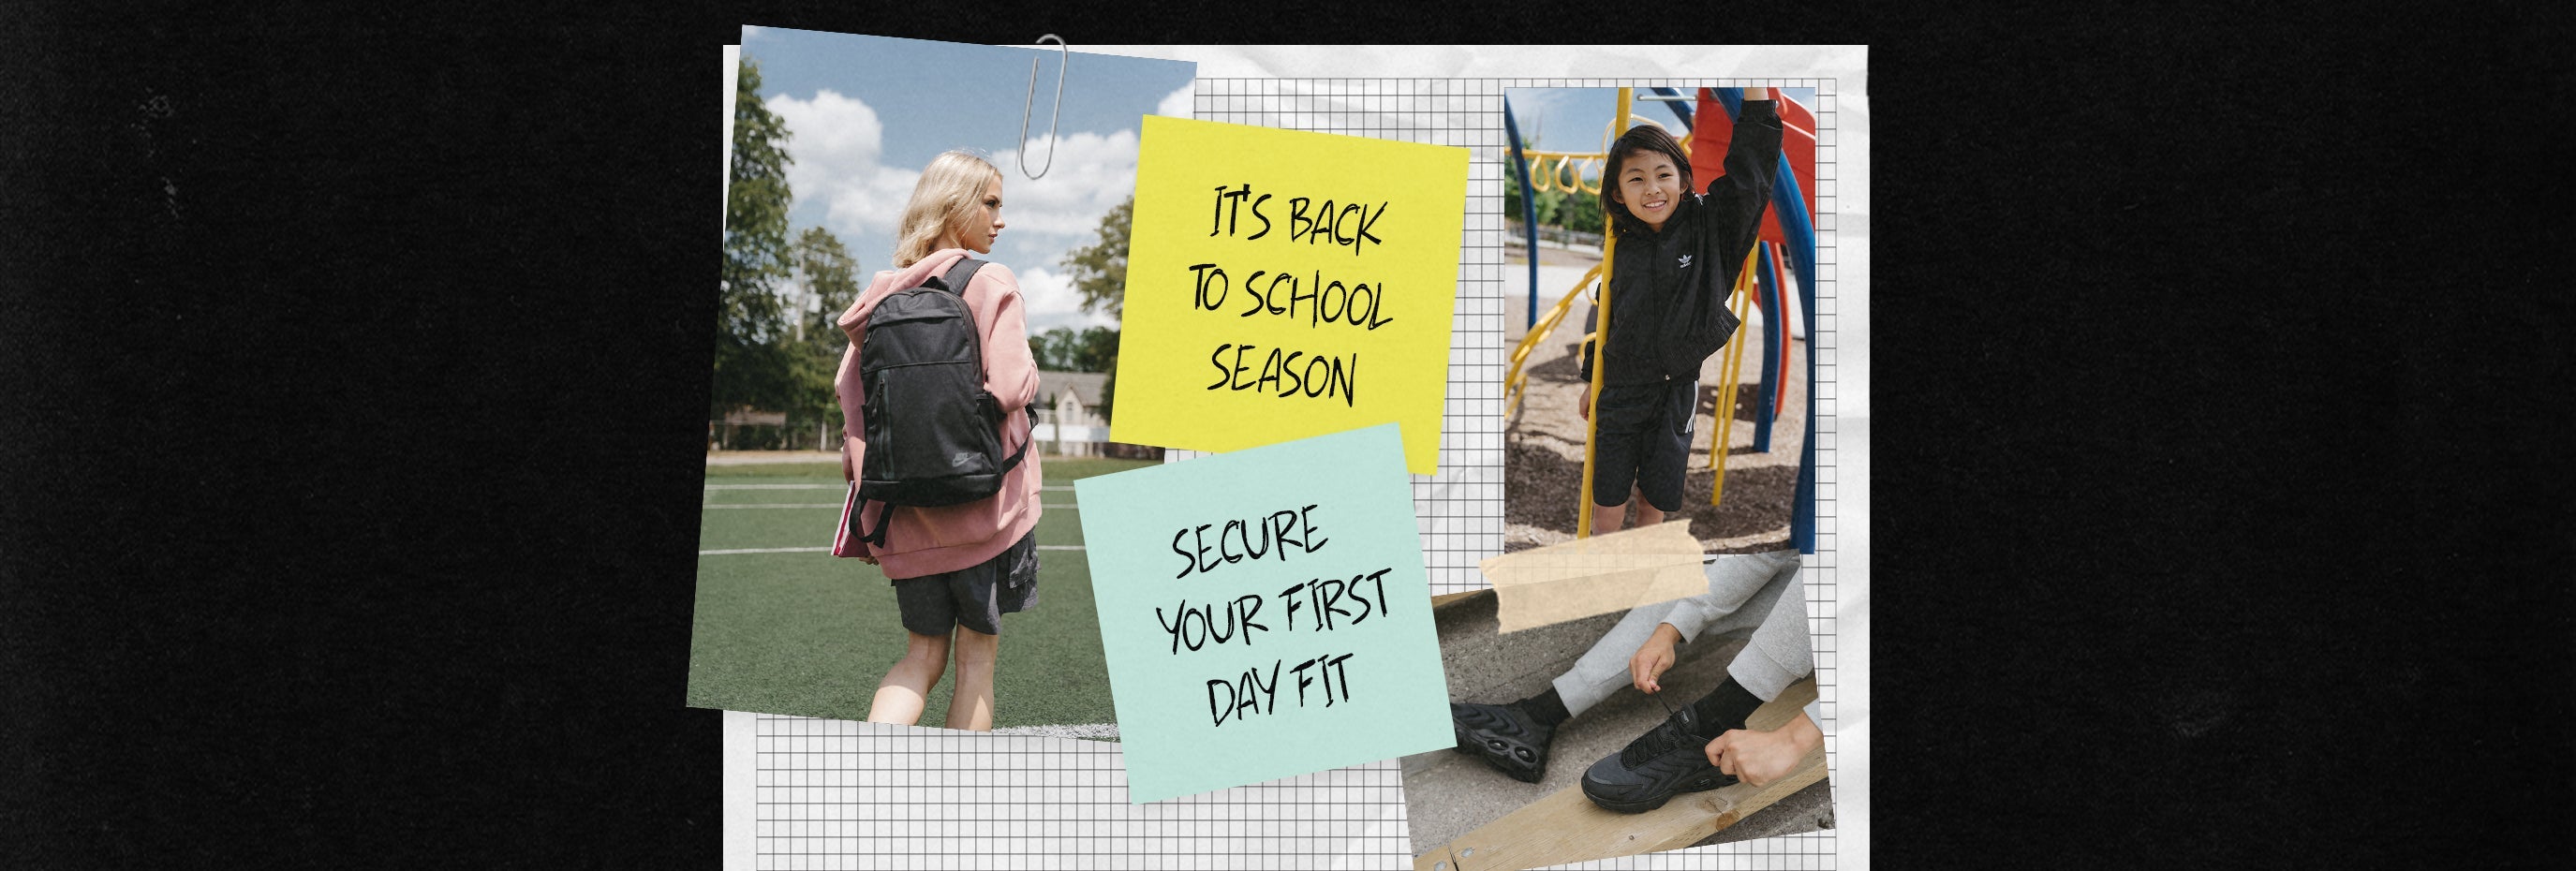 It's Back to School Season, Secure Your First Day Fit at JD Sports Canada. Read our Shopping Guide below.